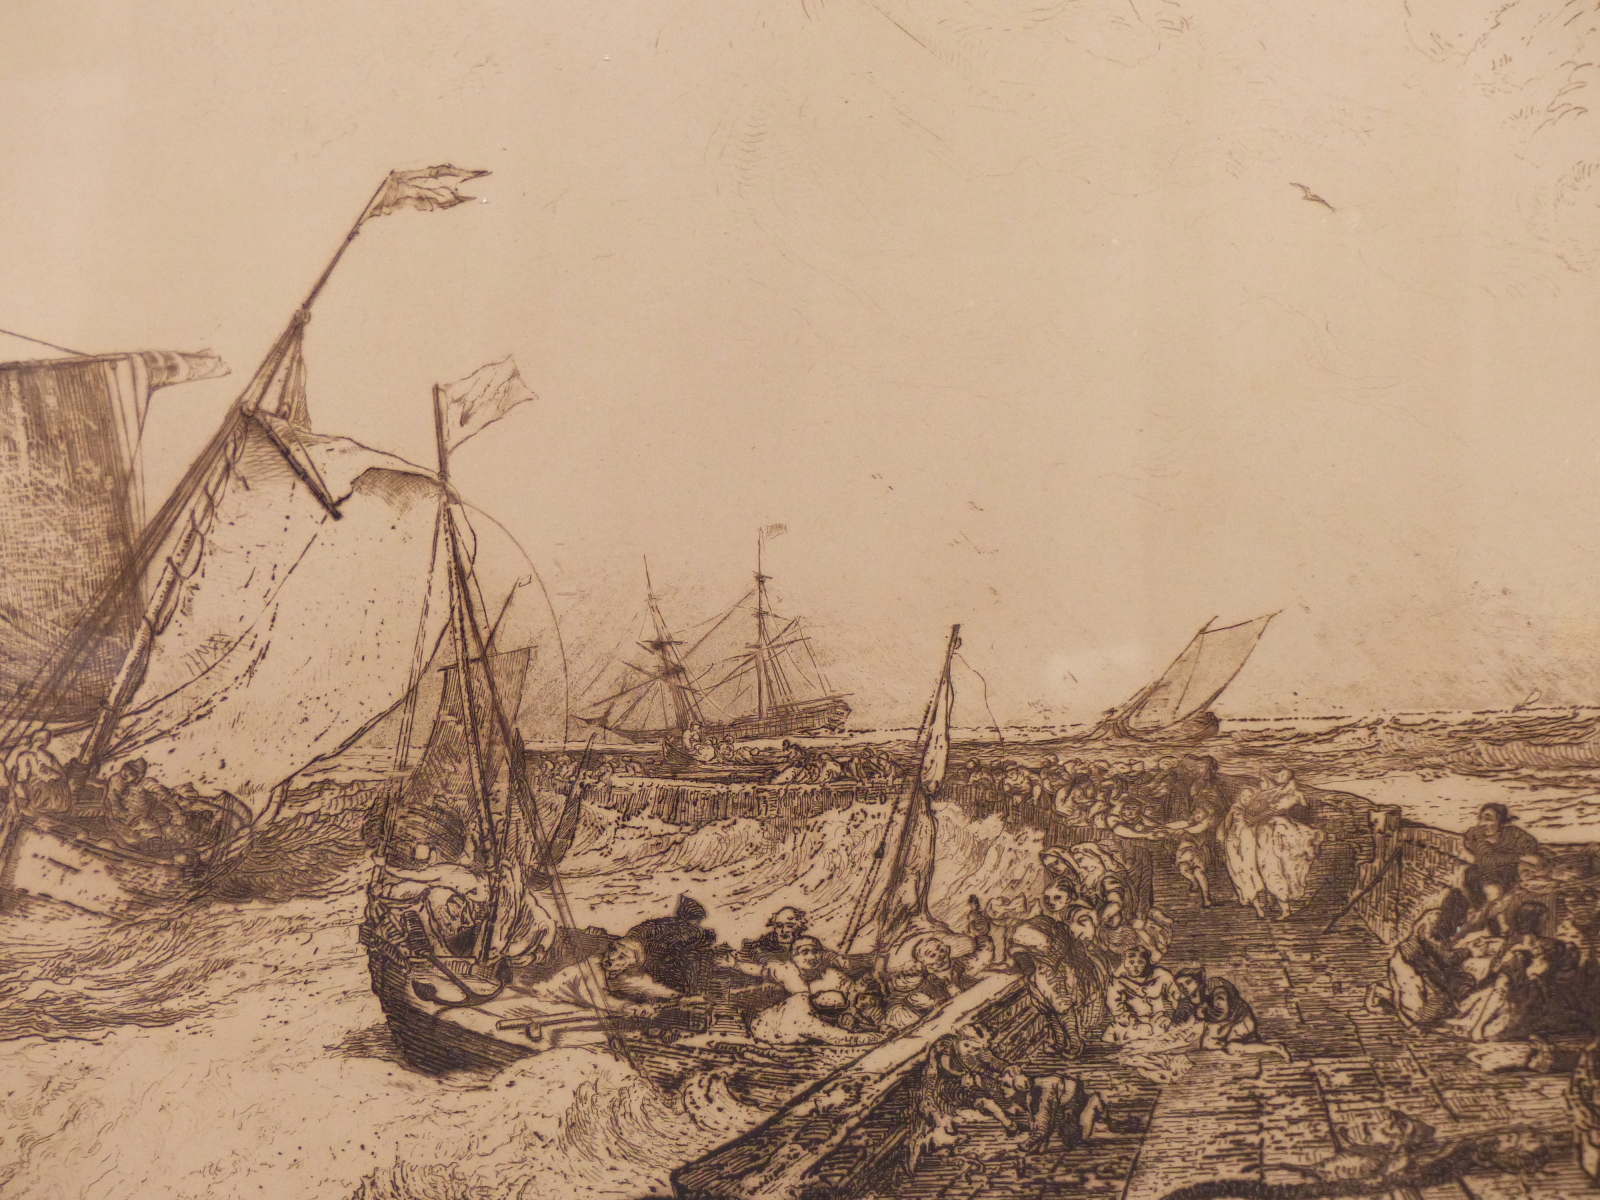 FRANCIS SEYMOUR HADEN AFTER J.M.W. TURNER, CALAIS PIER, SIGNED IN PENCIL, ETCHING, 84 x 60cms pl. - Image 4 of 7